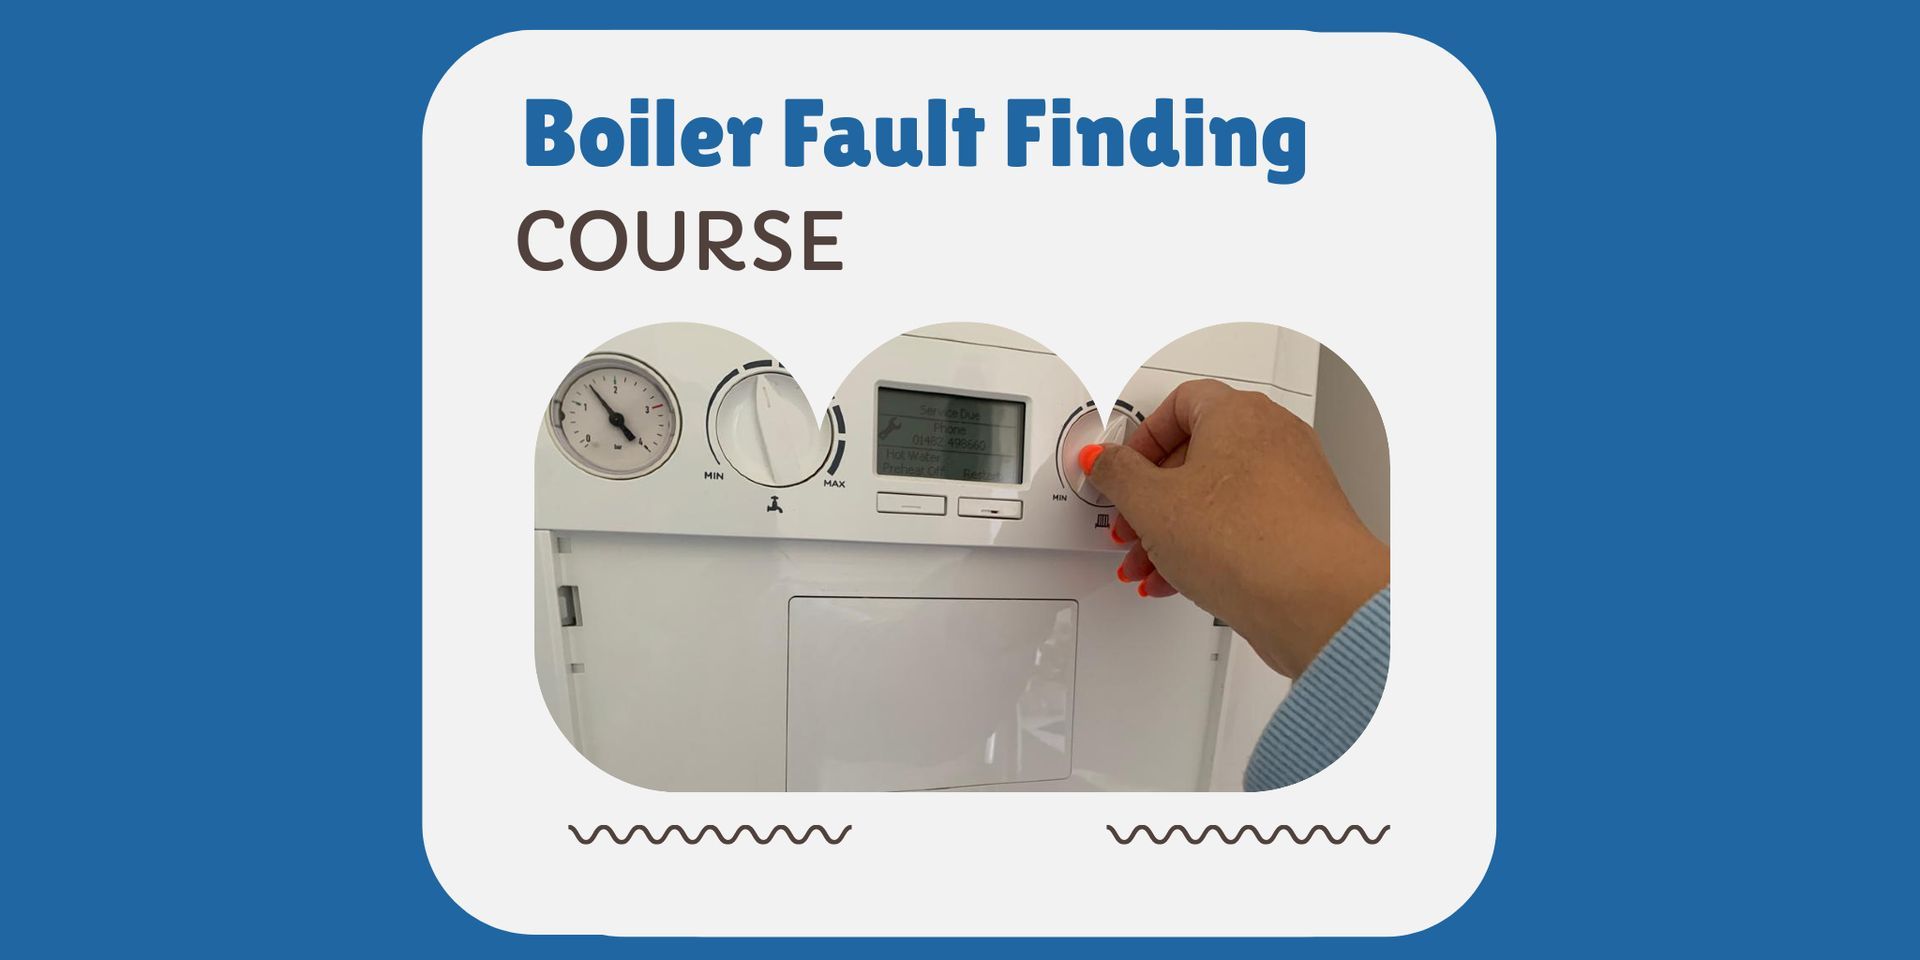 A person is looking at a boiler fault finding course.